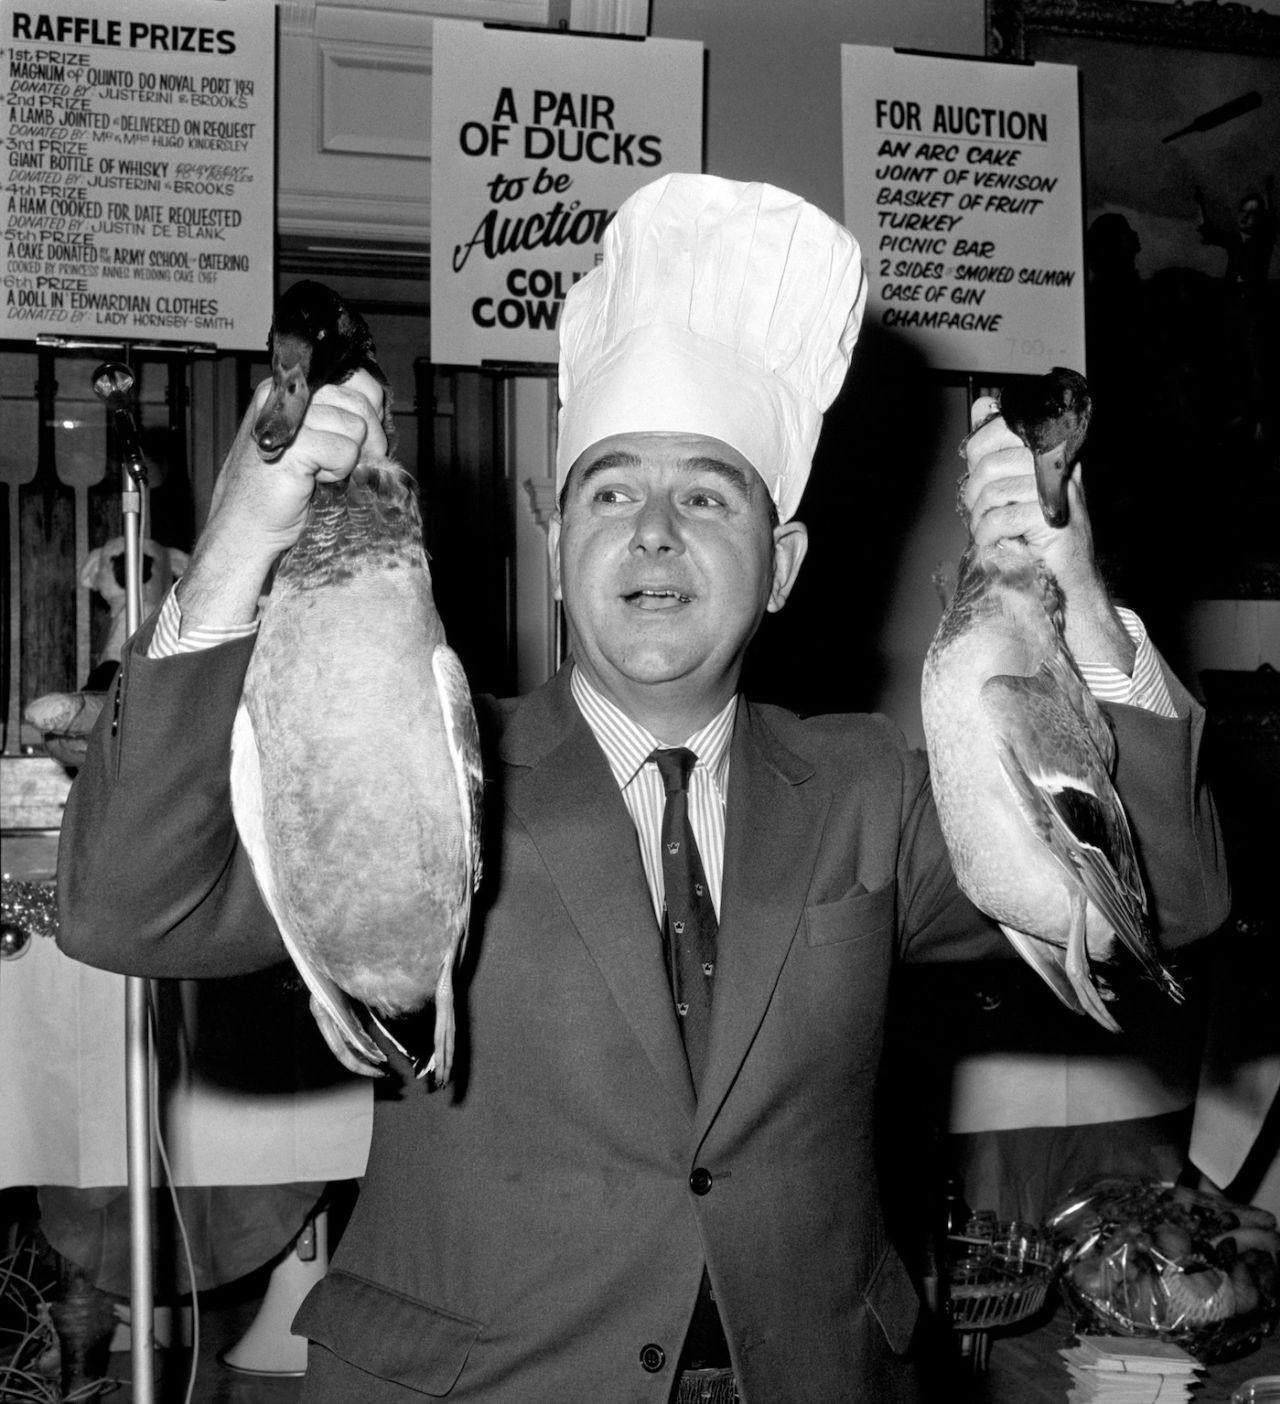 Colin Cowdrey auctions a pair of ducks at the 'Gourmet Food Fair' on behalf of the Arthritis and Rheumatism Council, Lords, November 14, 1974